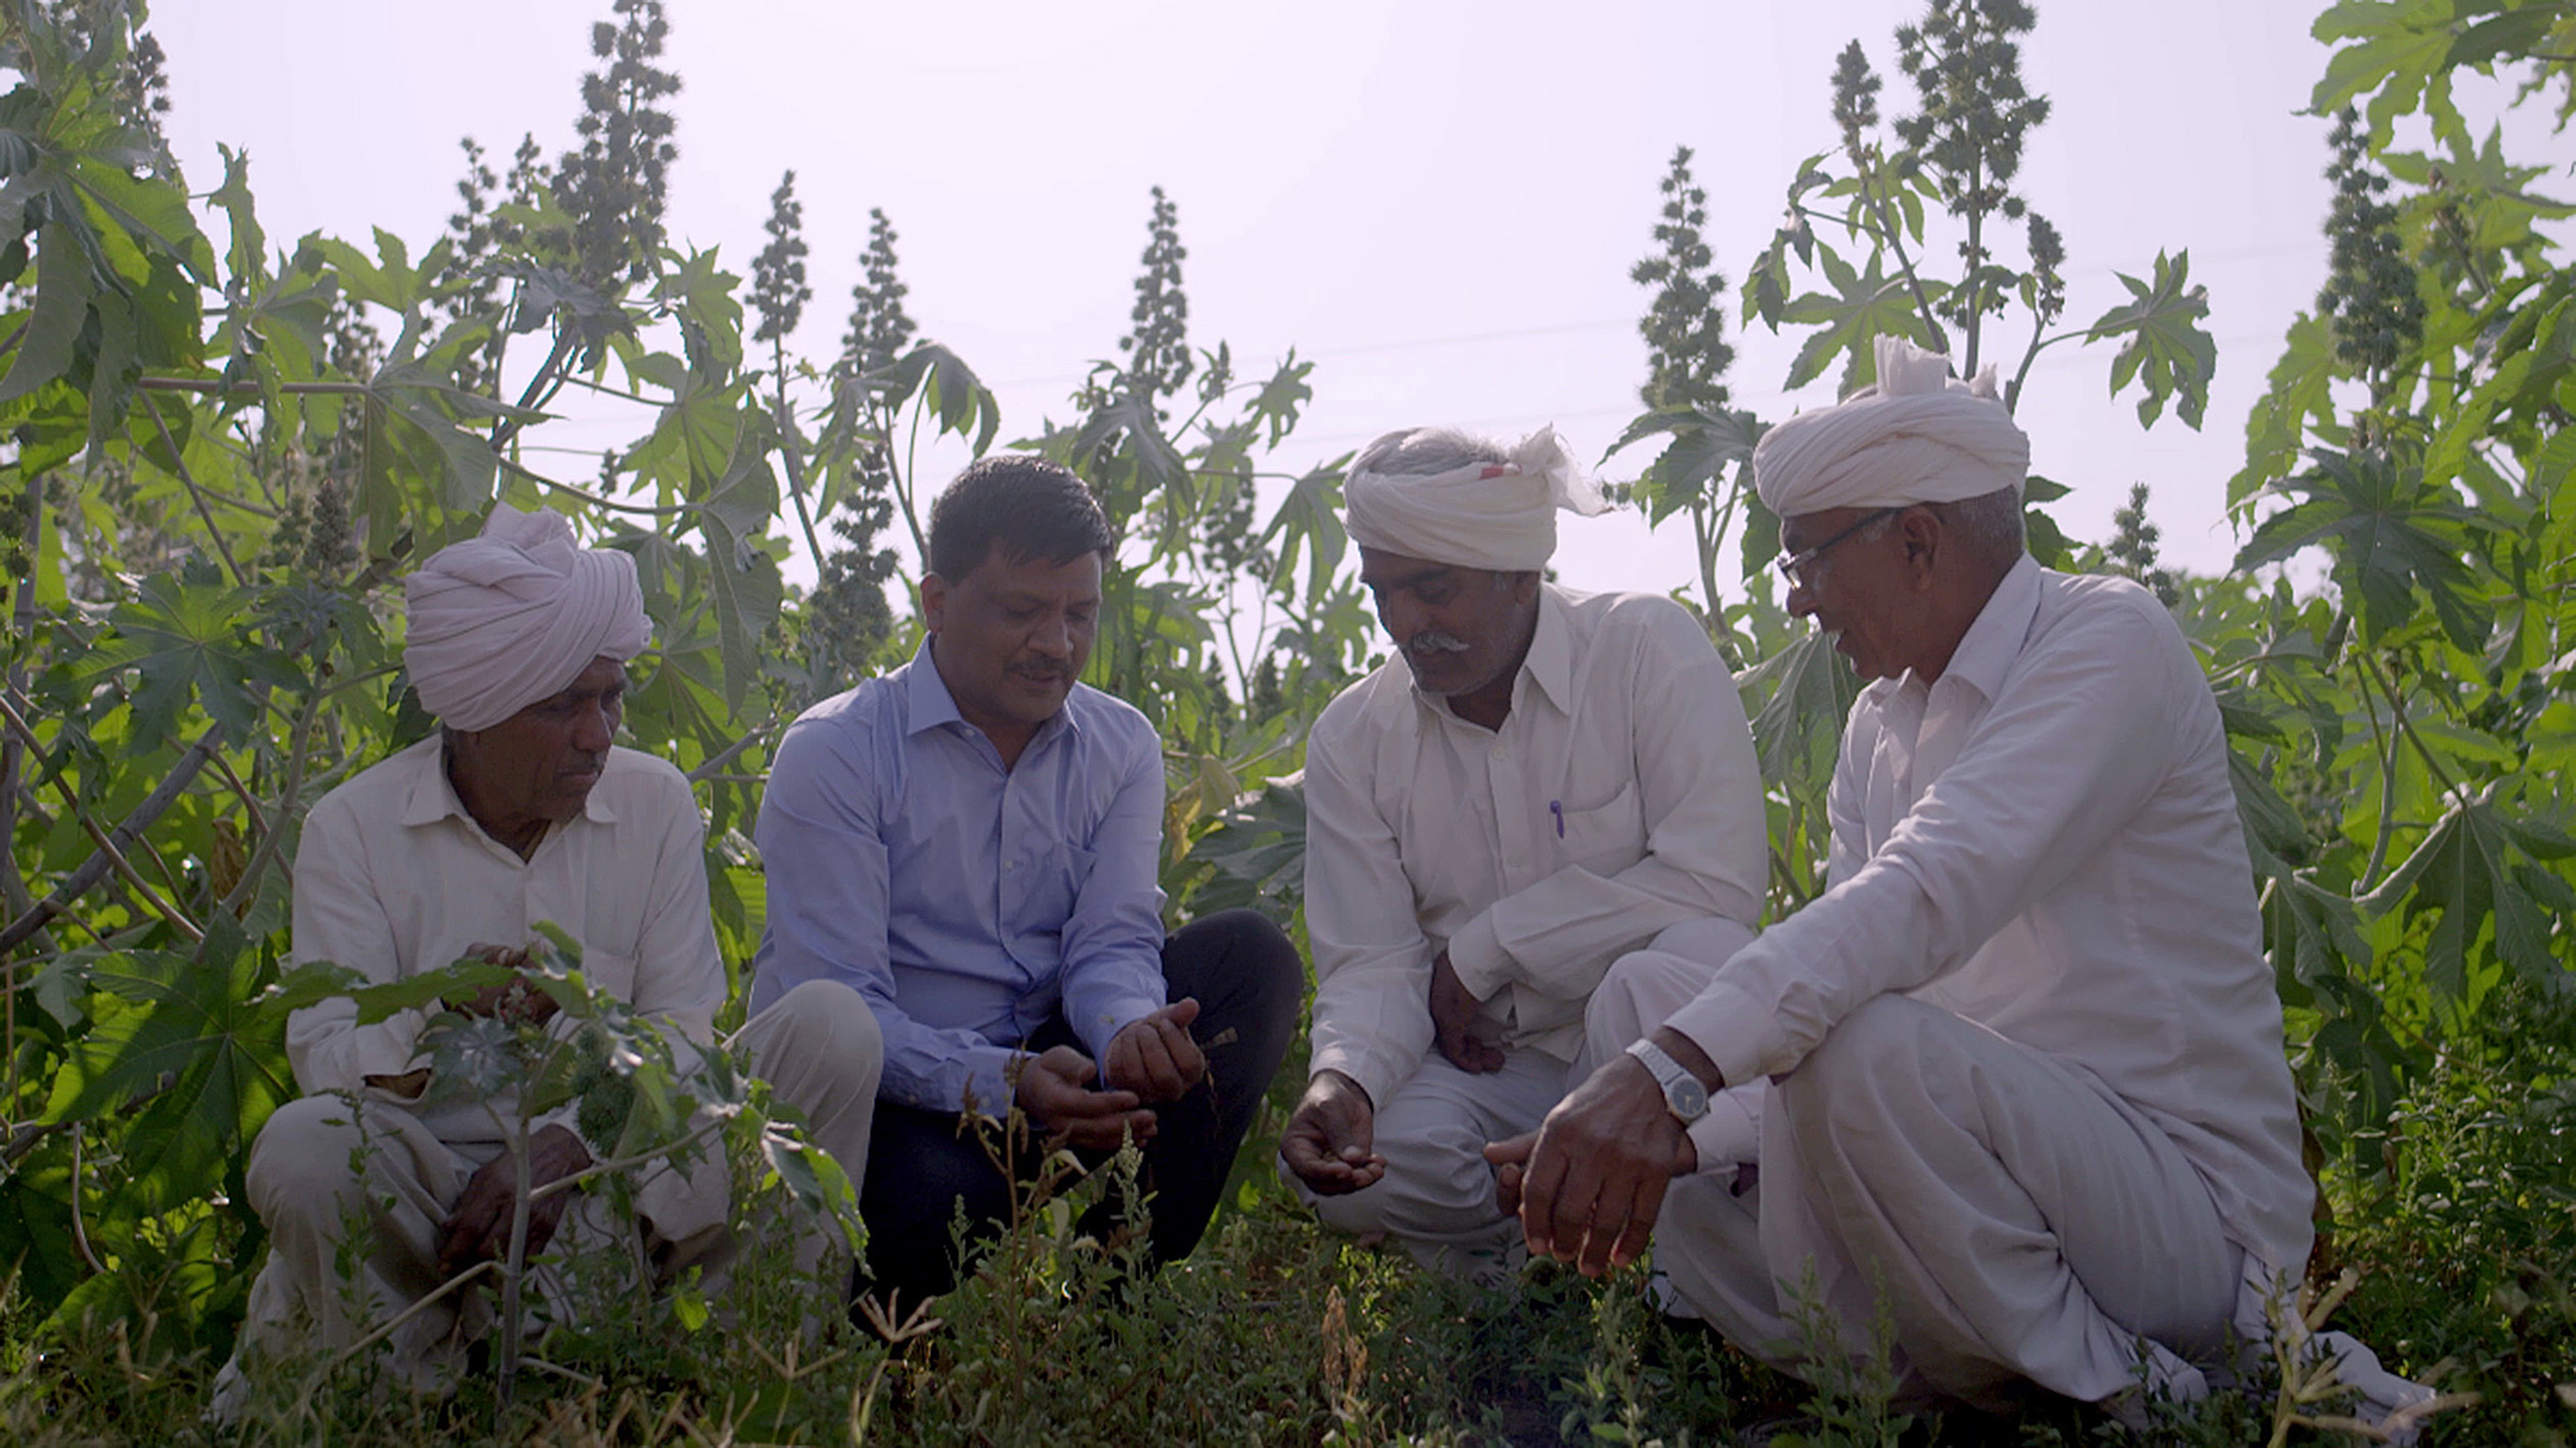 BASF and its Partners Publish Results for ‘Pragati’, World’s First Sustainable Castor Bean Program